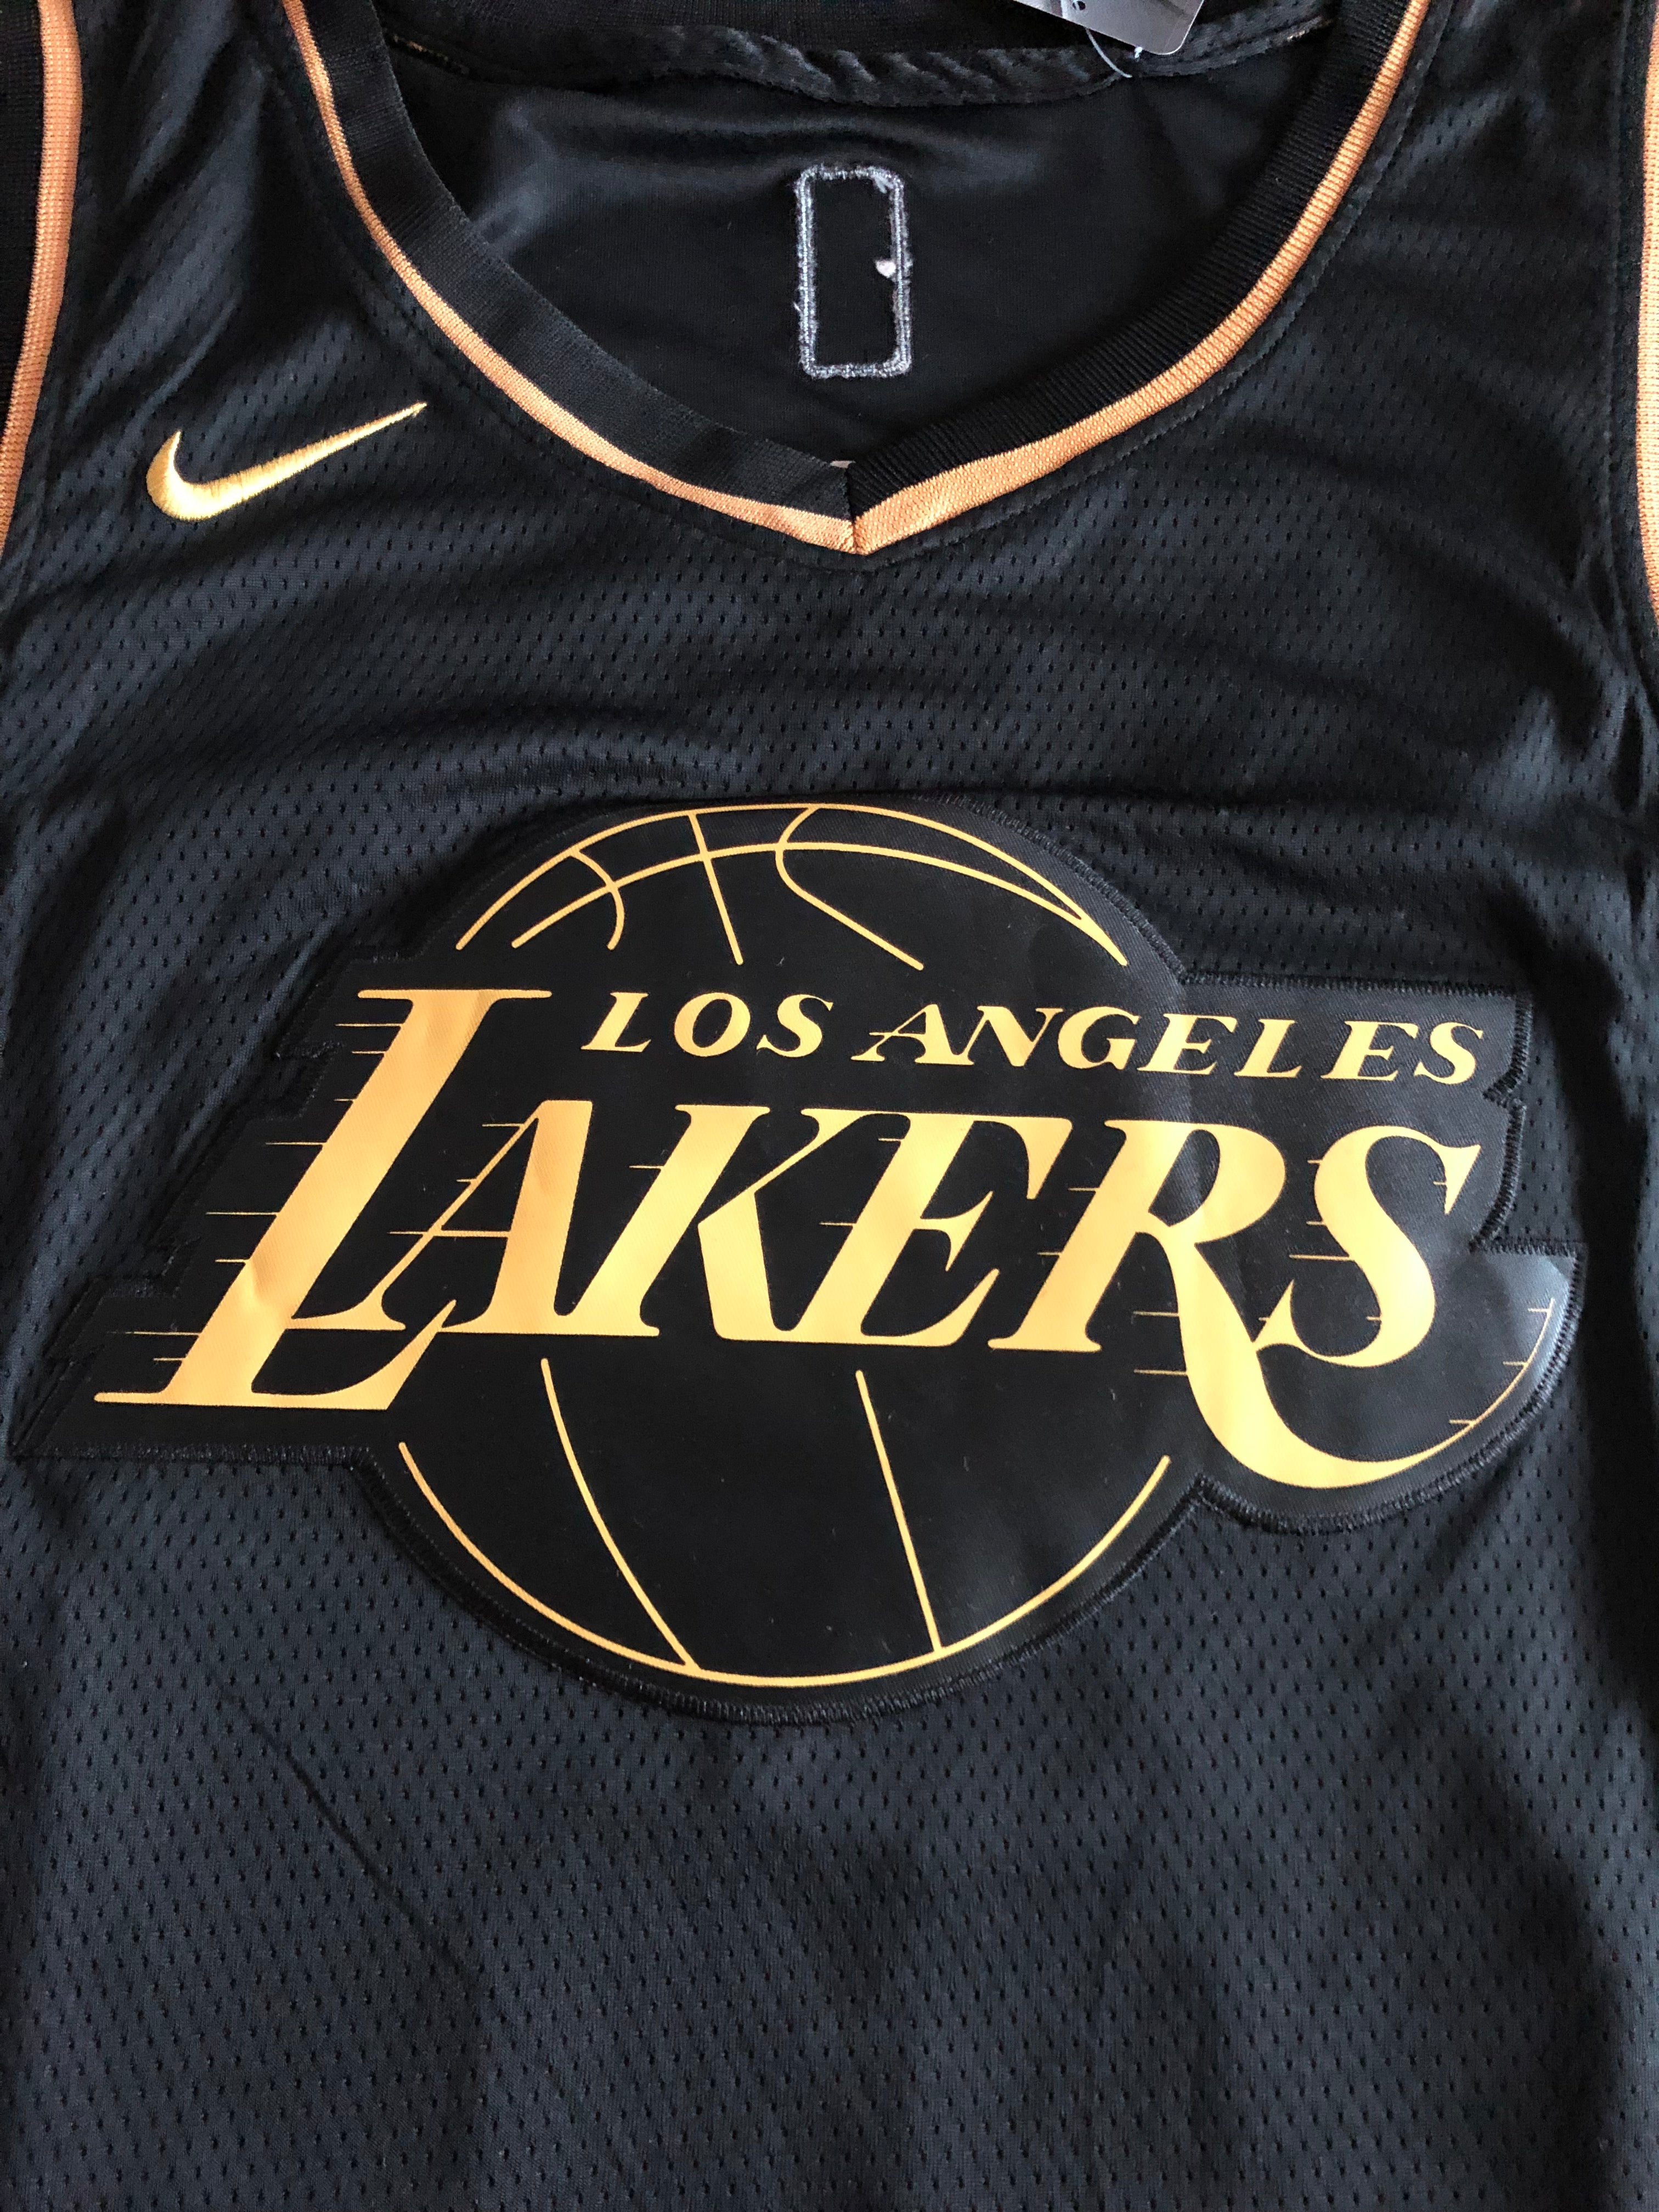 lakers jersey black gold